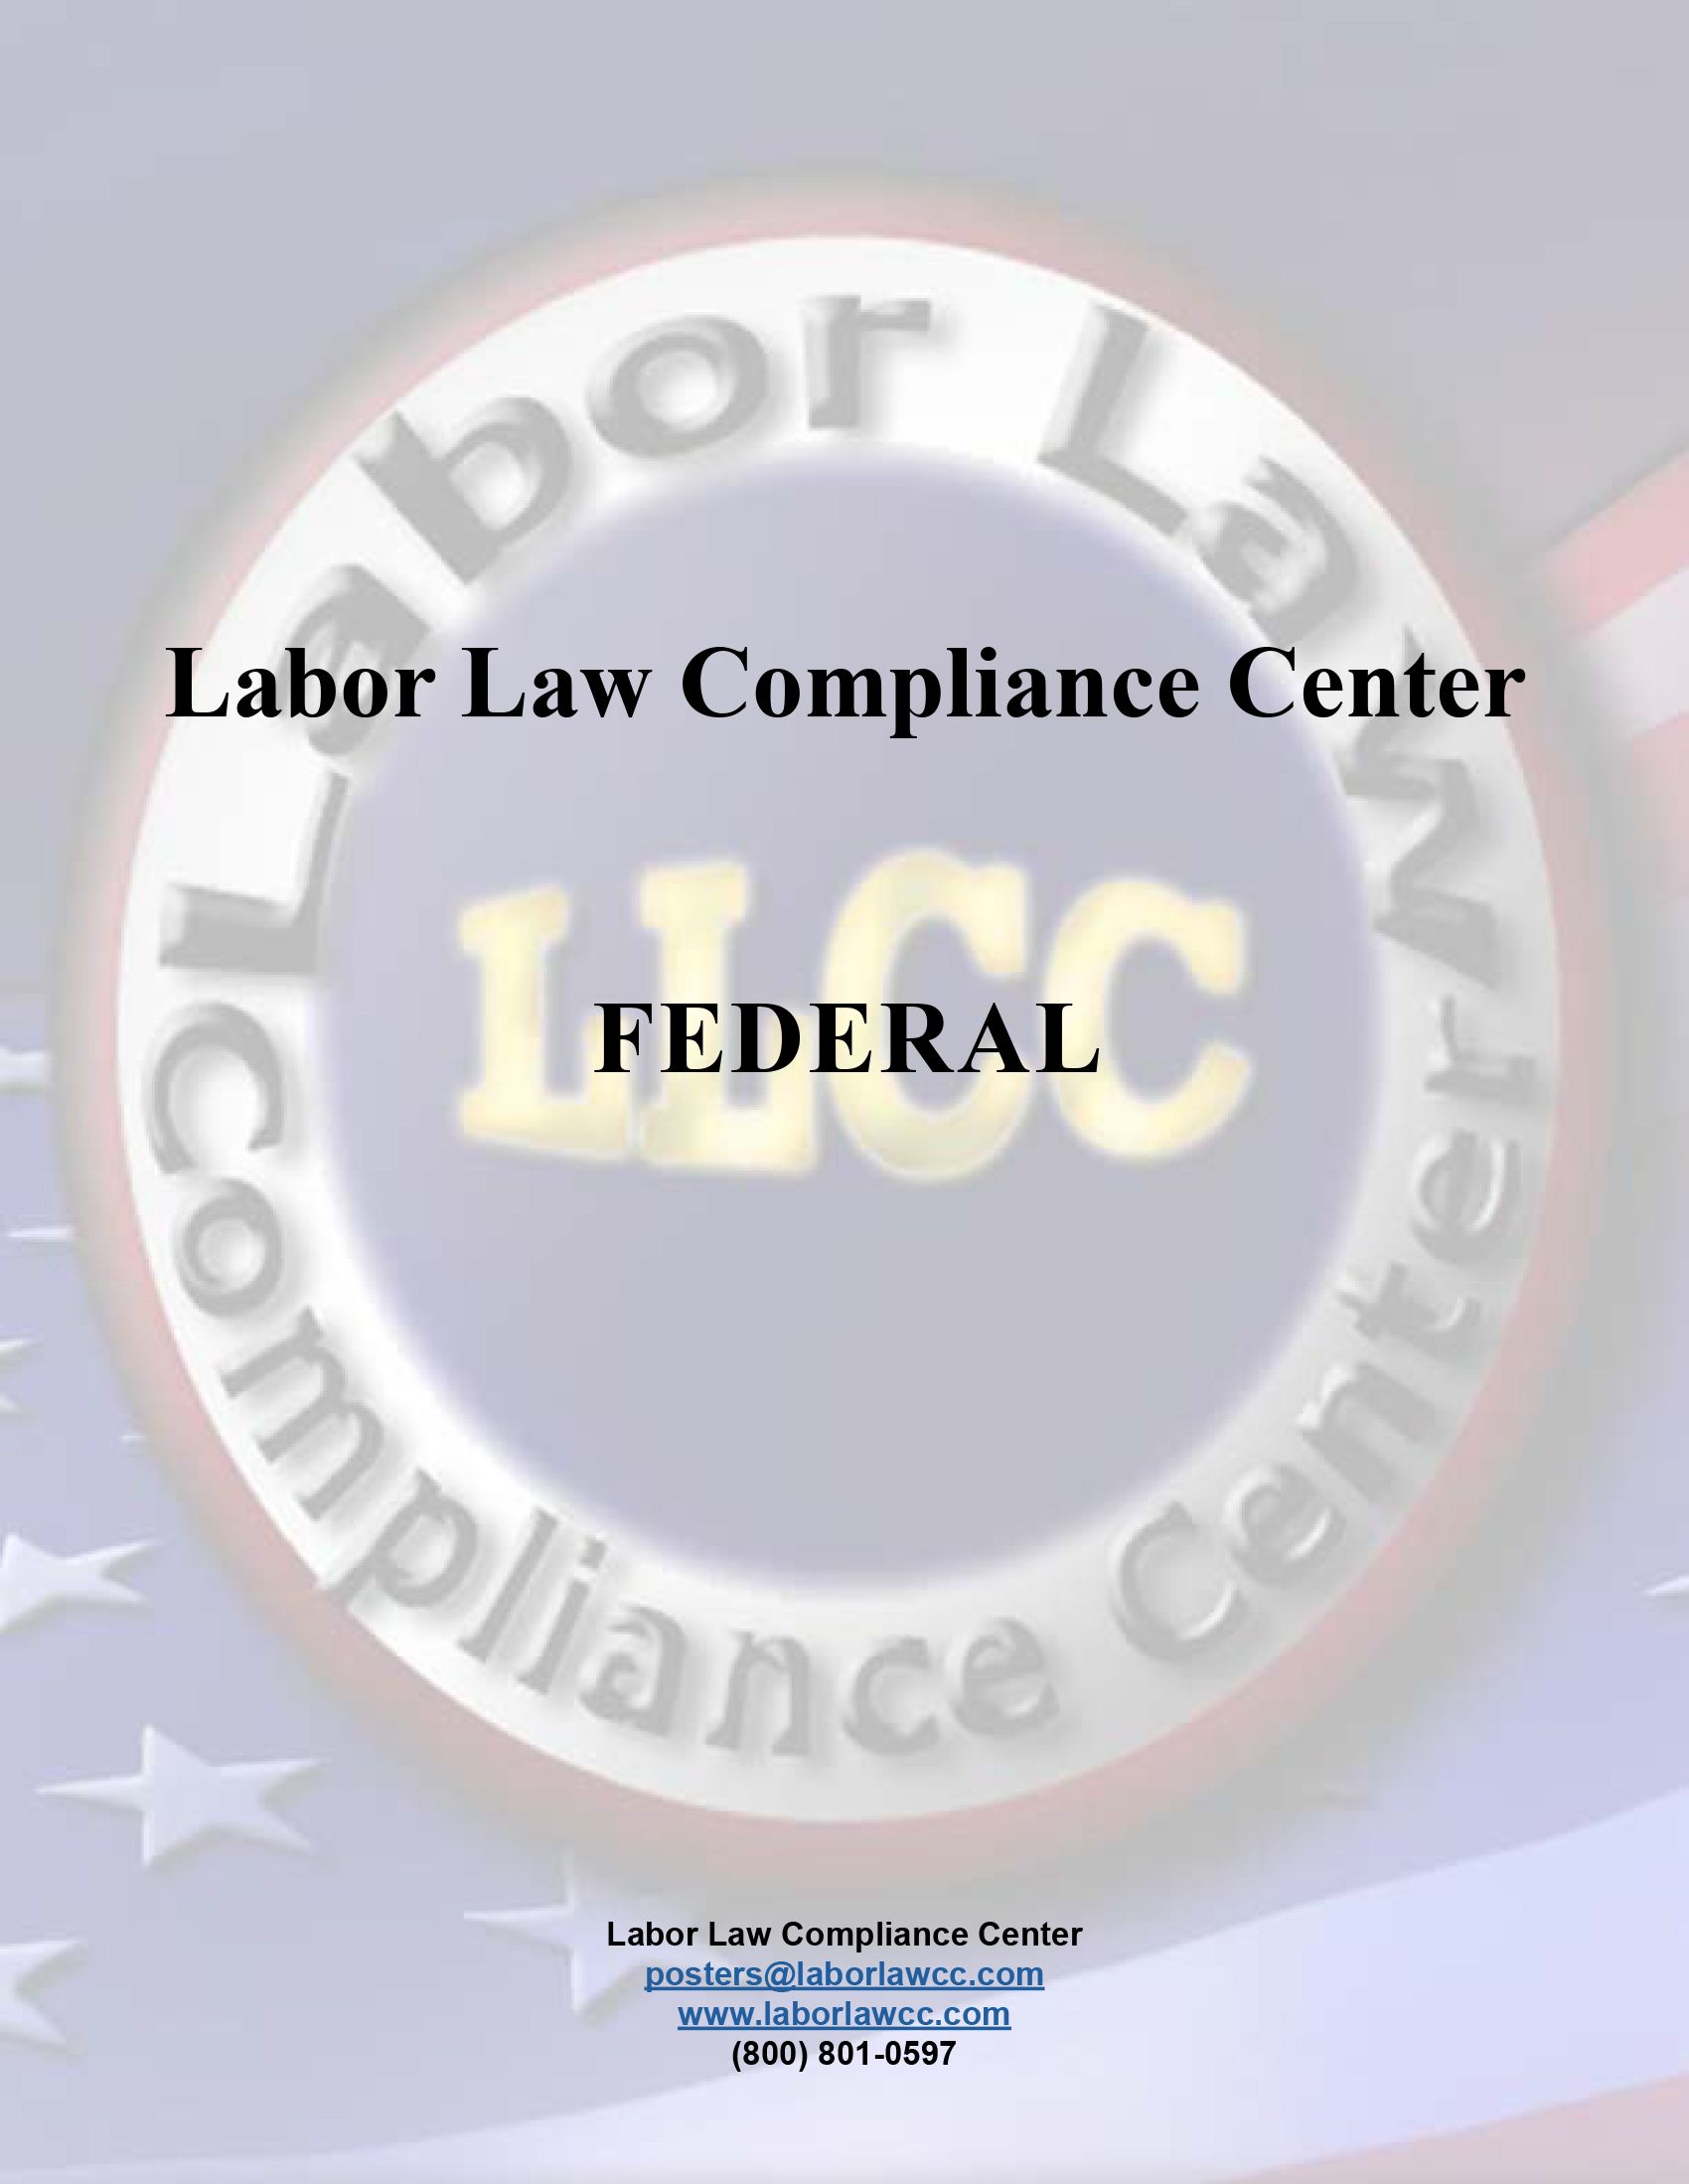 Labor Law Compliance Center - Federal